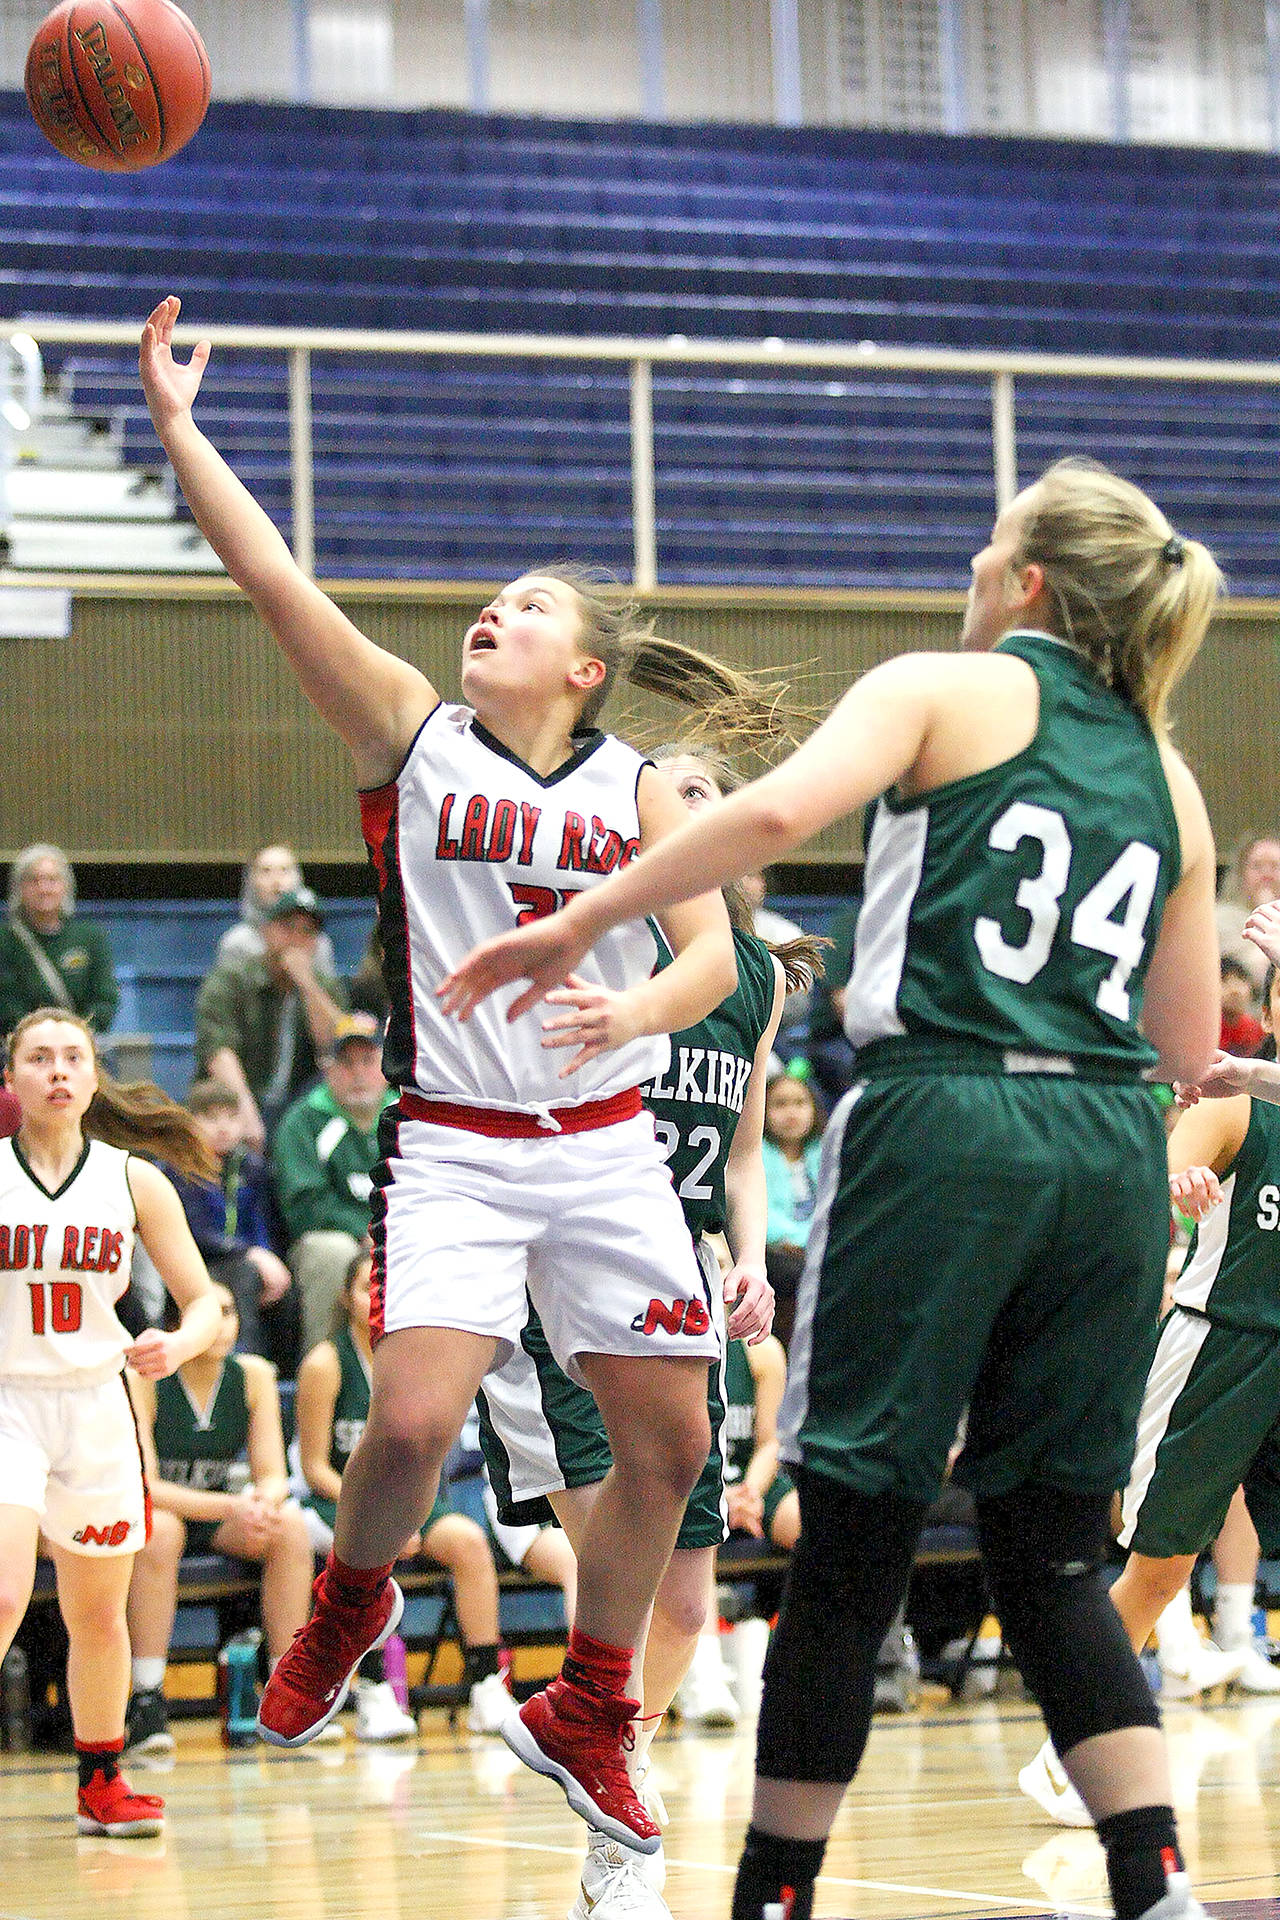 David Willoughby/for Peninsula Daily News Neah Bay senior Gina McCaulley, left, earned Associated Press honorable mention All-State honors. She is a member of the Peninsula Daily News All-Peninsula Girls Basketball team.